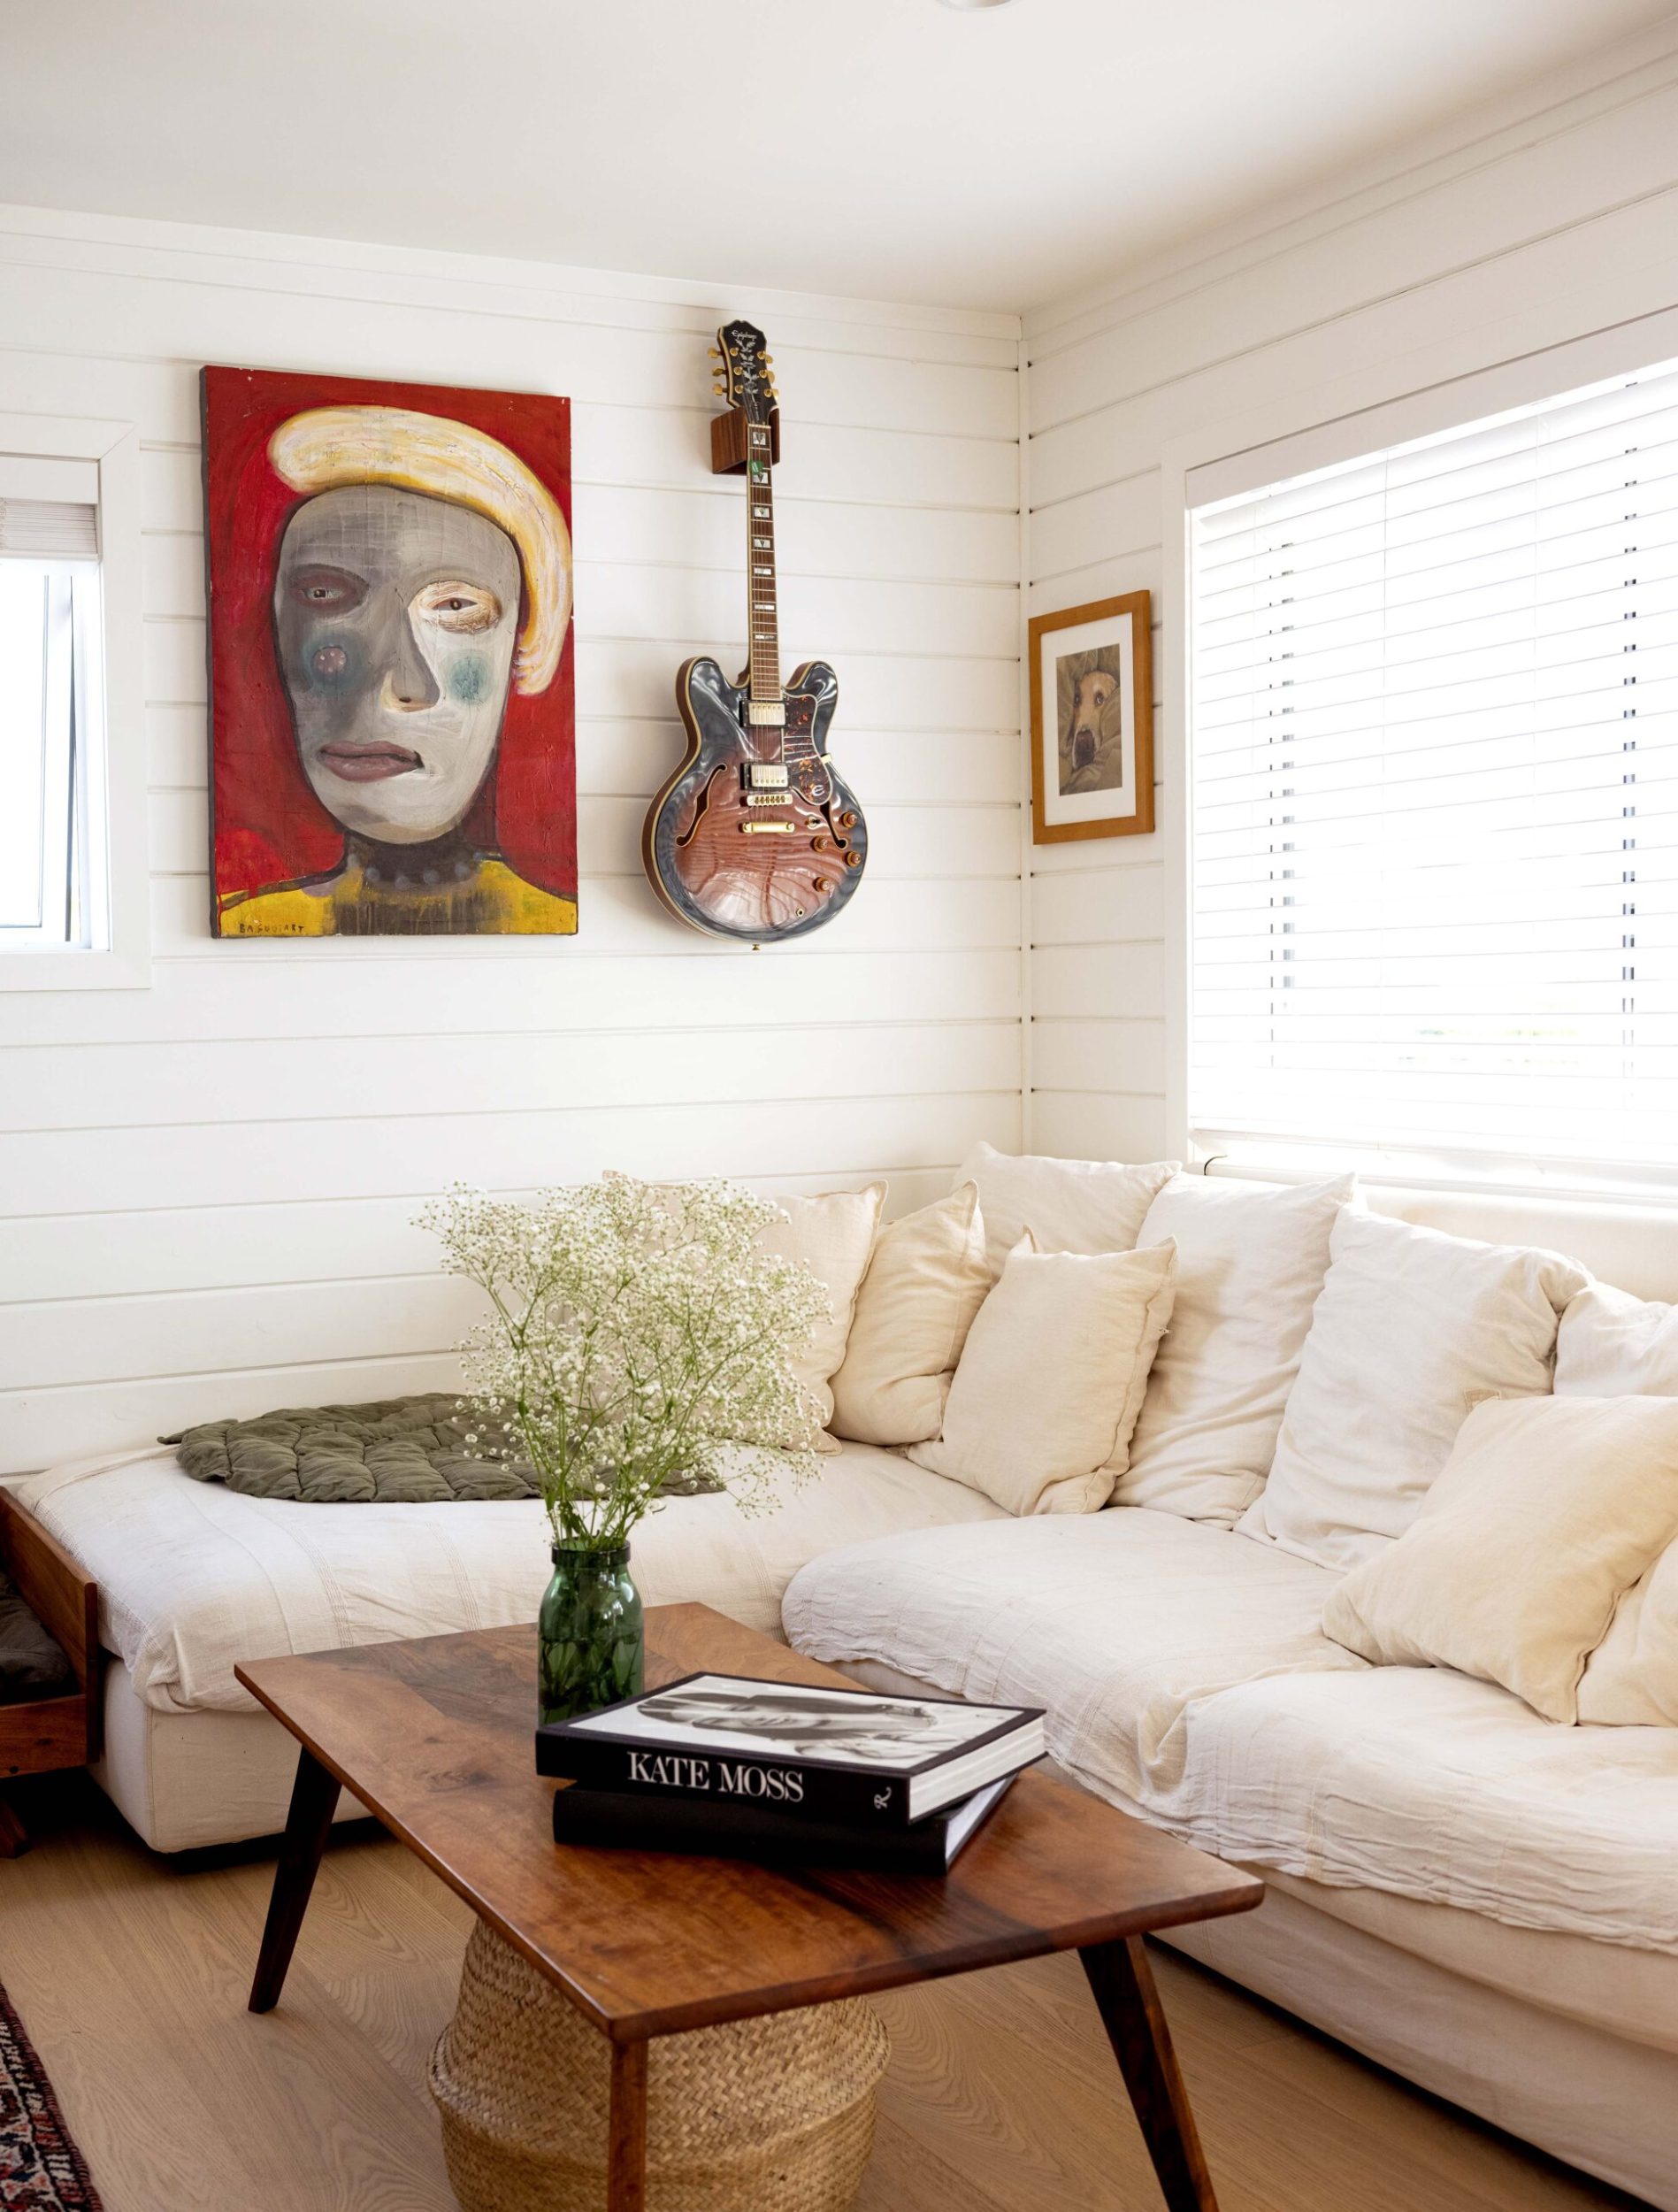 Corner of lounge with white linen couch and large painting and guitar on the wall